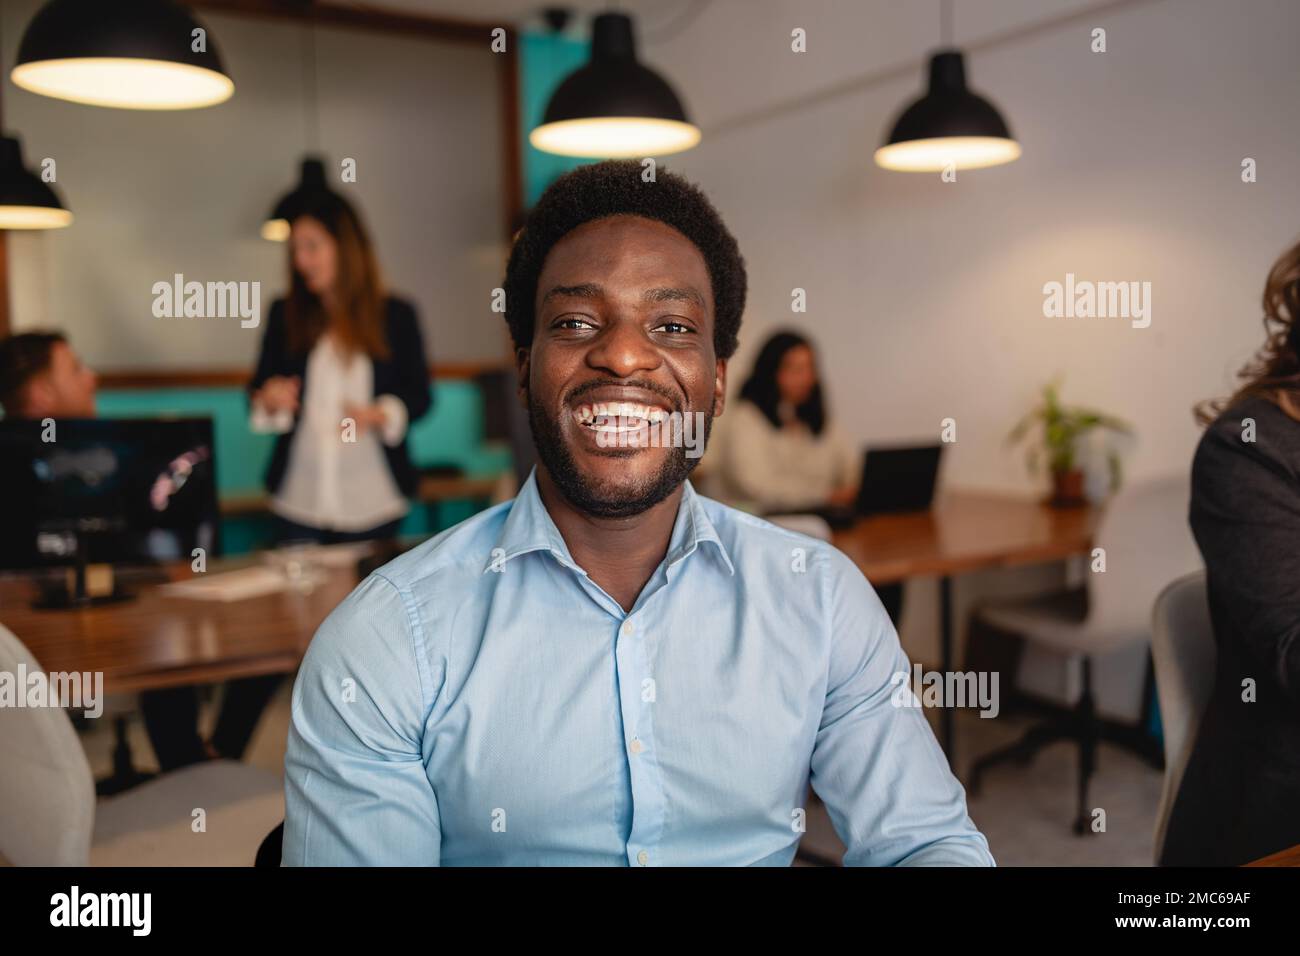 Happy African man in coworking creative space Stock Photo